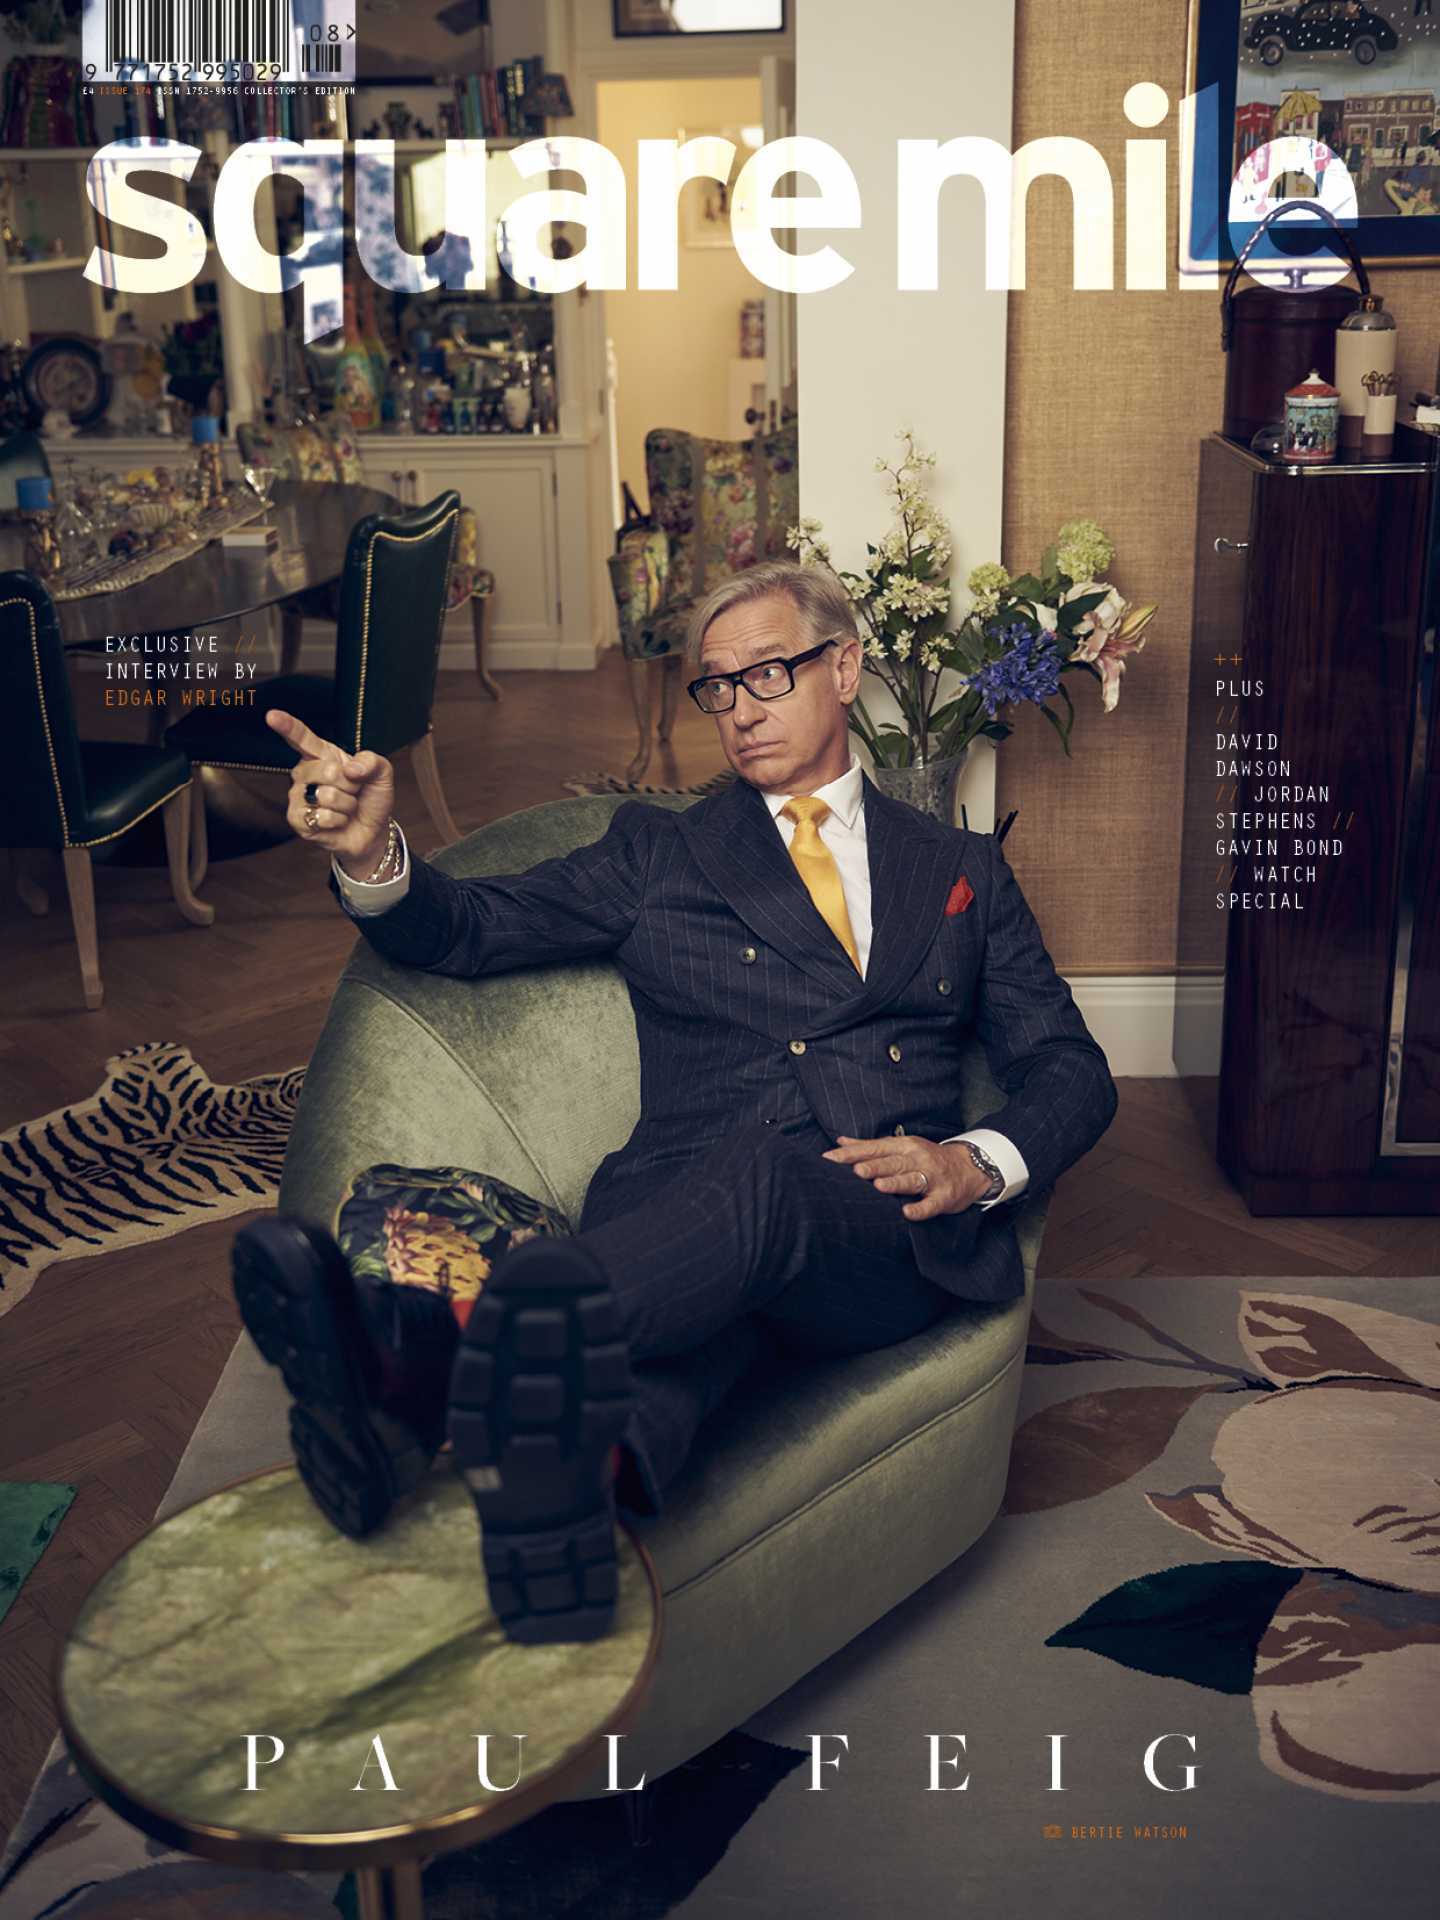 Paul Feig photographed for Square Mile by Bertie Watson